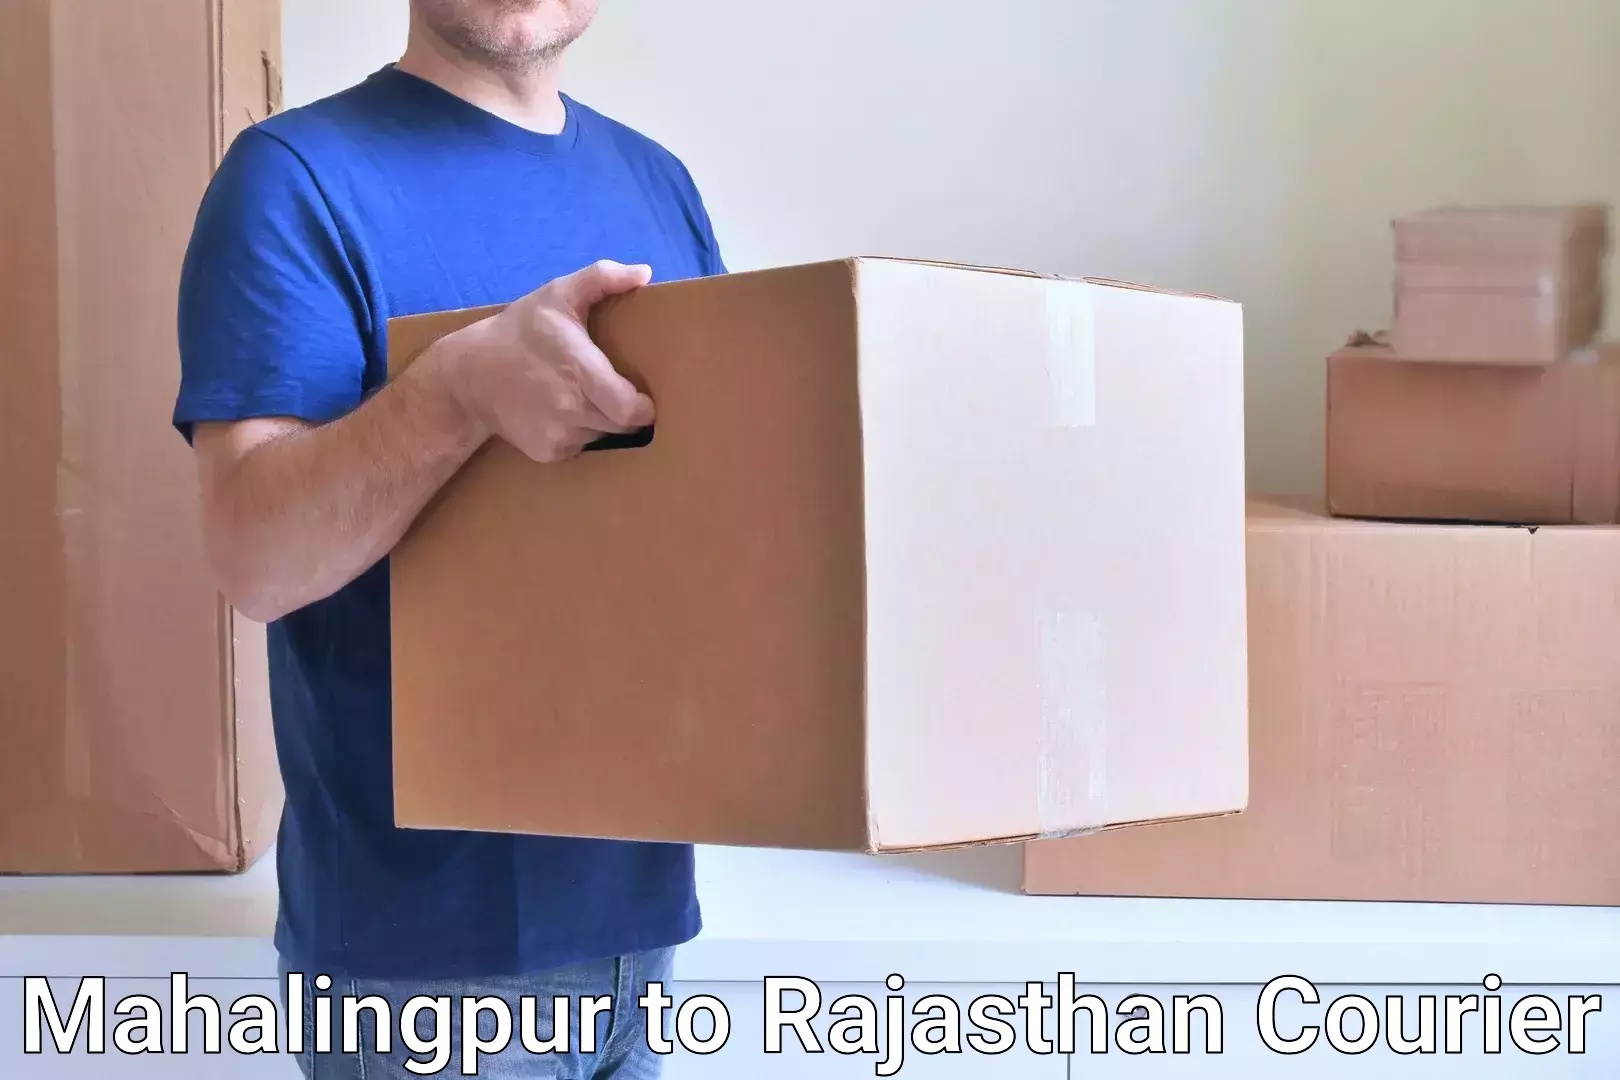 On-call courier service Mahalingpur to Rajasthan